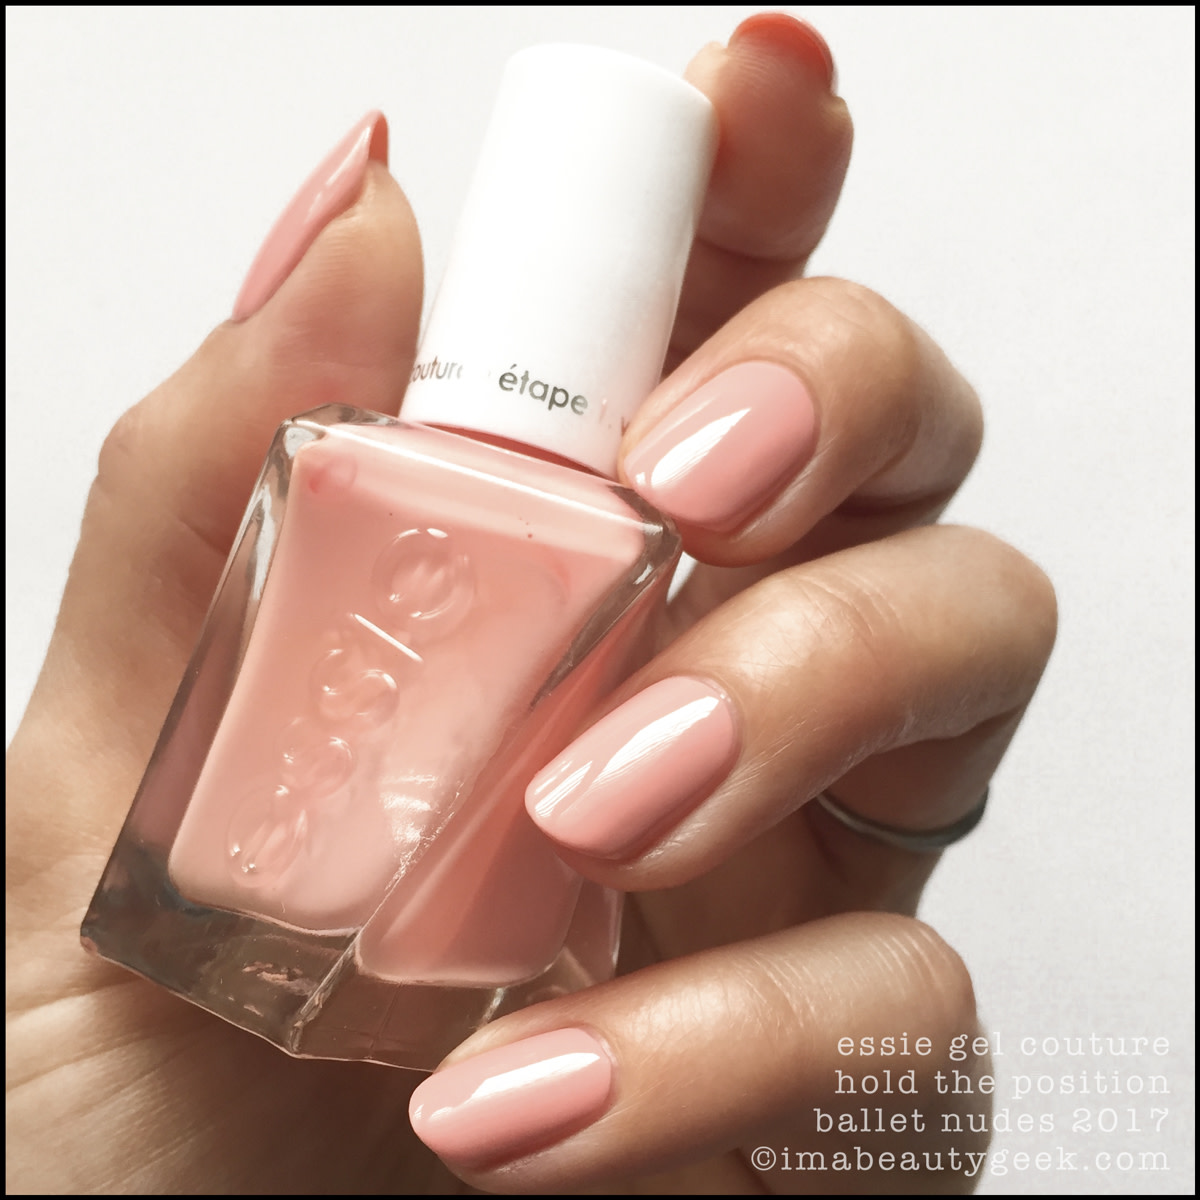 Essie Hold the Position_Essie Gel Couture Ballet Nudes Collection Swatches Review 2017